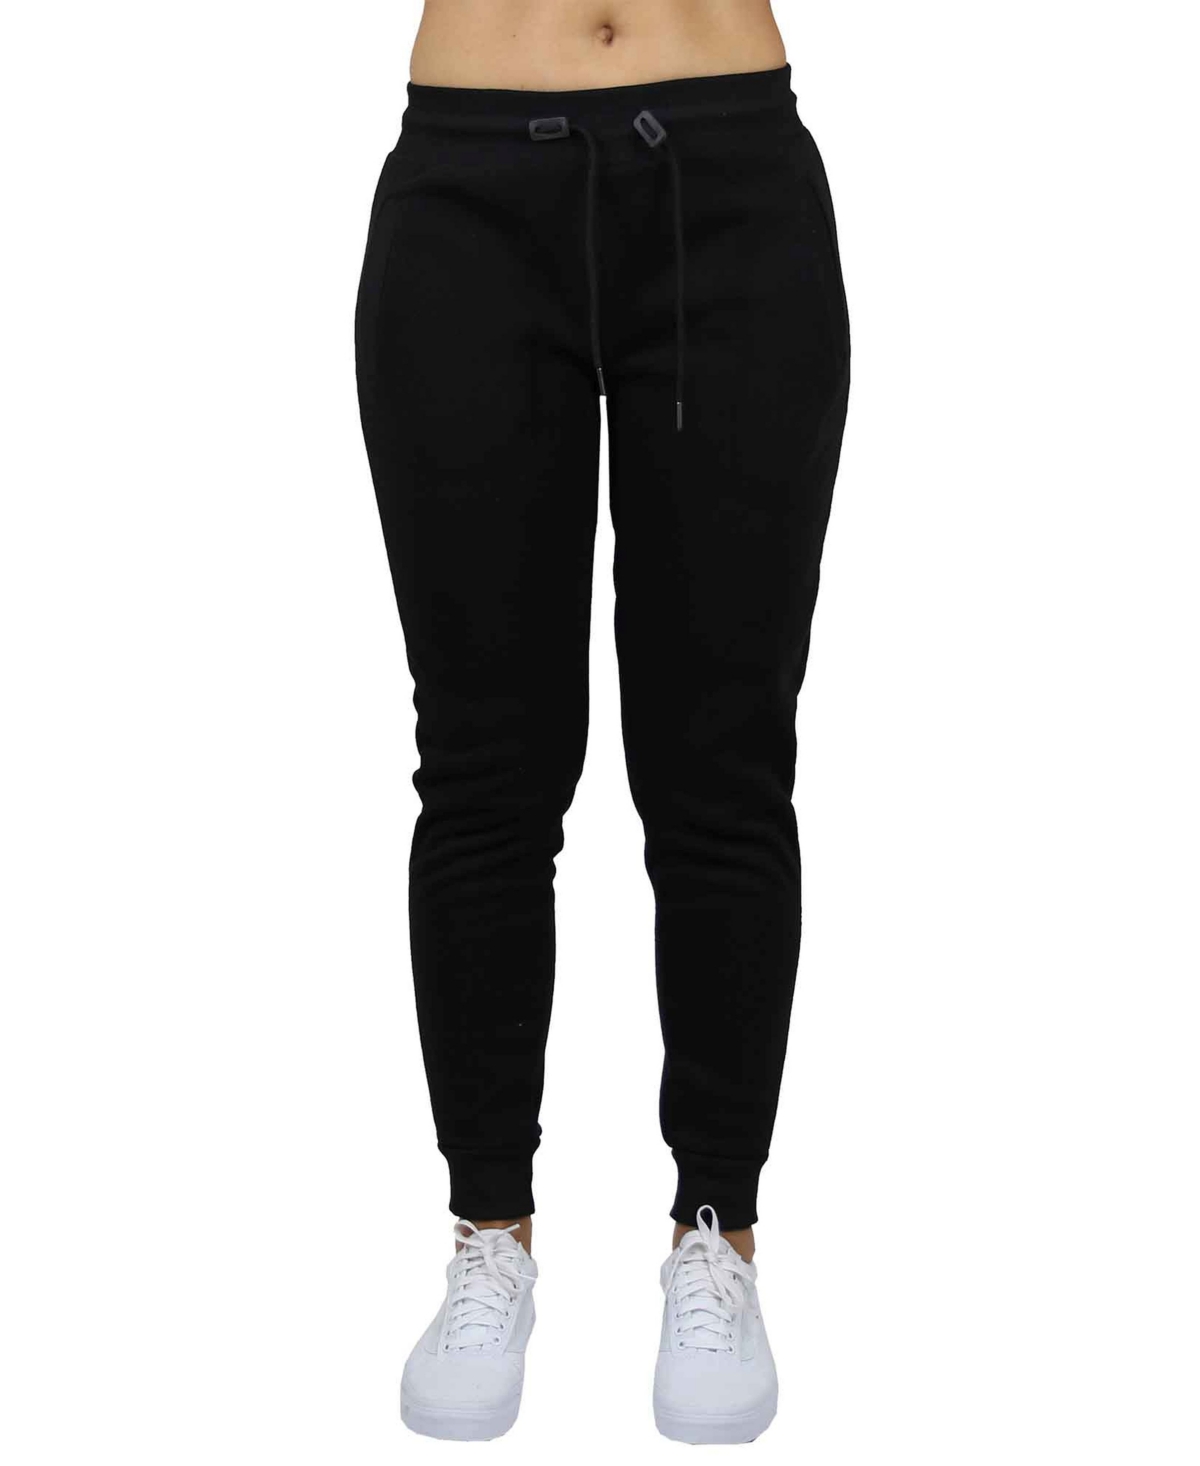 Women's Loose Fit French Terry Jogger Sweatpants - Navy